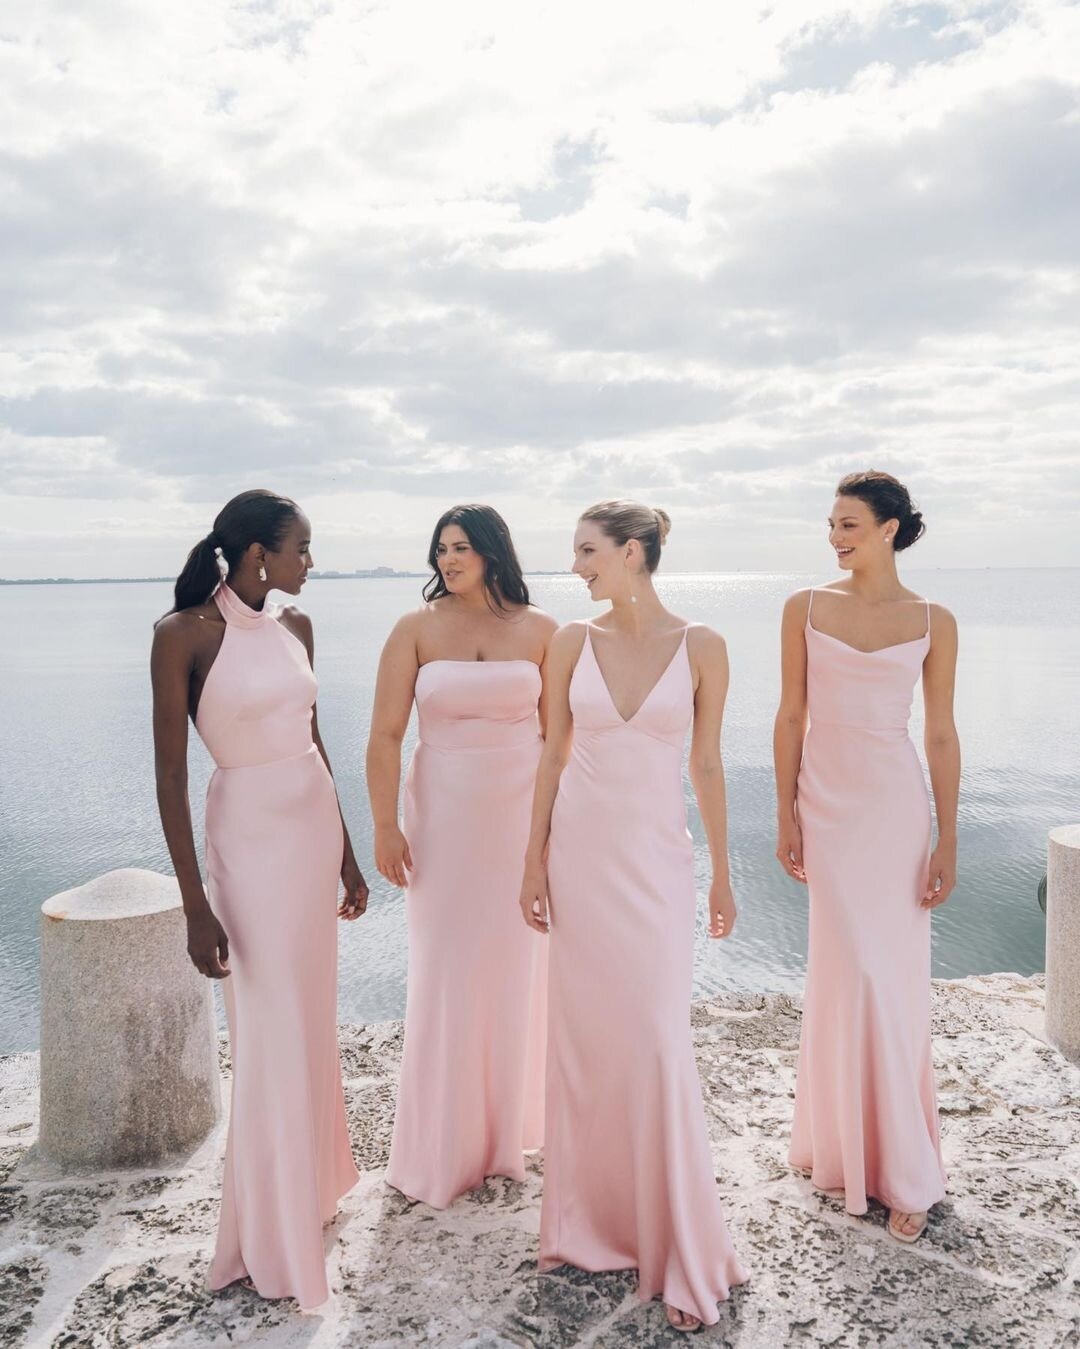 Explore the enchanting @jennyyoonyc Bridesmaids Reverie Collection! 💕

Discover meticulously crafted silhouettes, gorgeous floral prints, and beautiful hues that both you and your bridesmaids will adore

Book your bridesmaid appointment to view our 